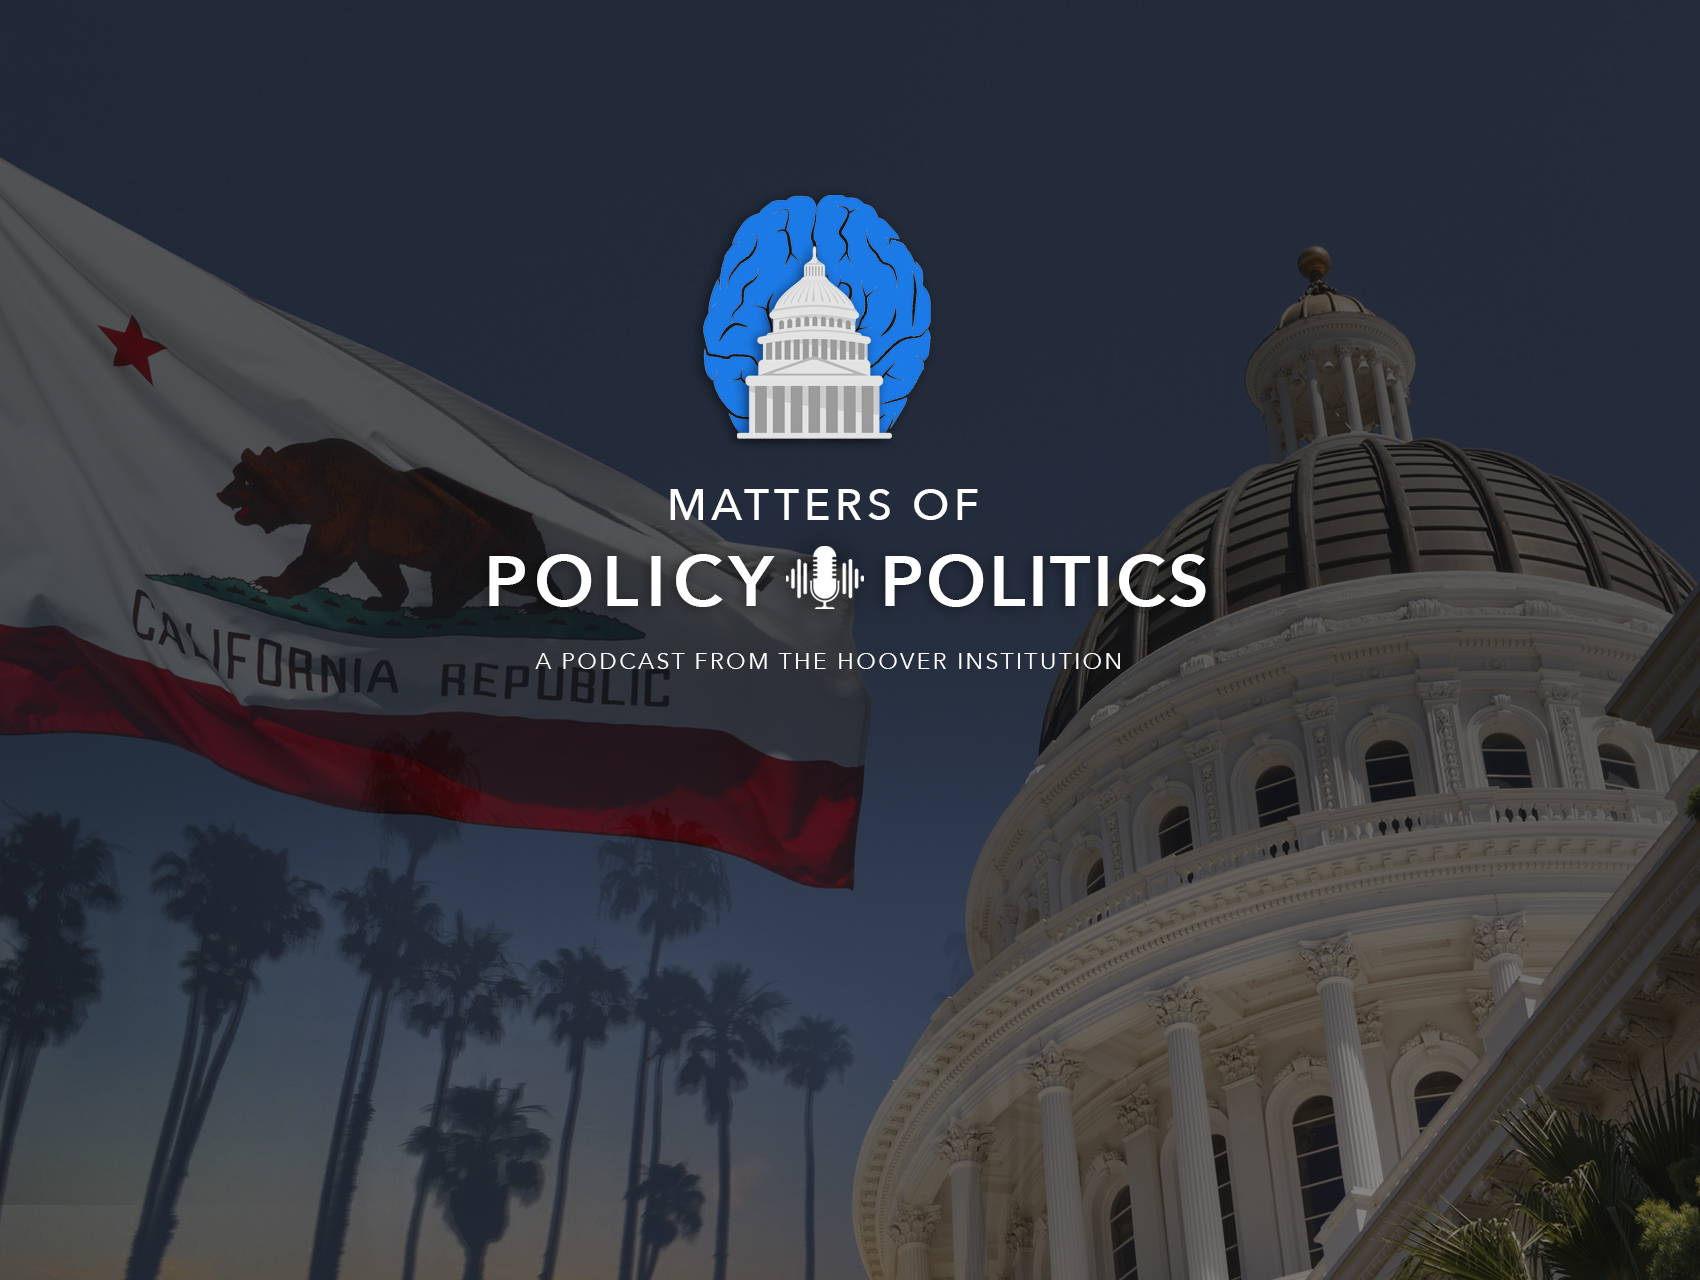 Matters-of-Policy-Politics1700px_california.jpg